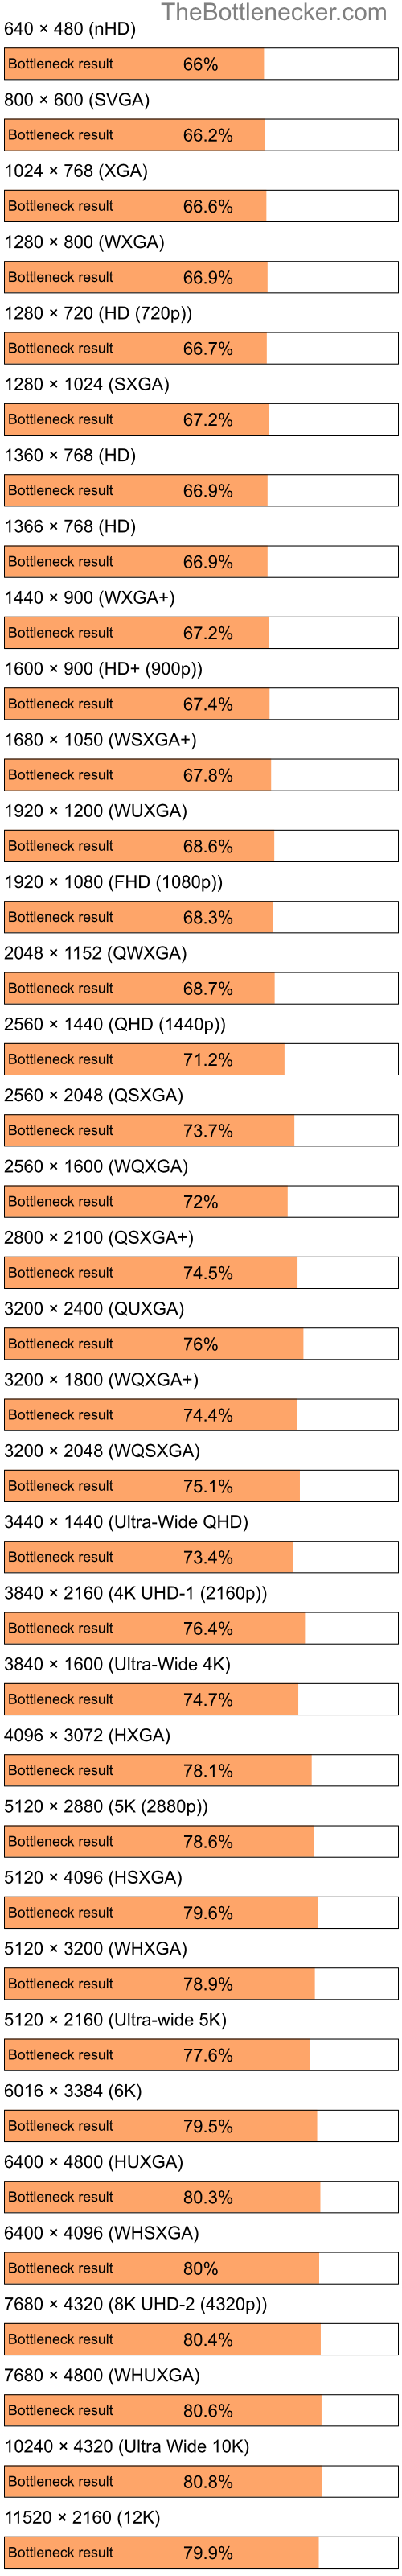 Bottleneck results by resolution for Intel Atom N270 and AMD Mobility Radeon HD 2400 in7 Days to Die